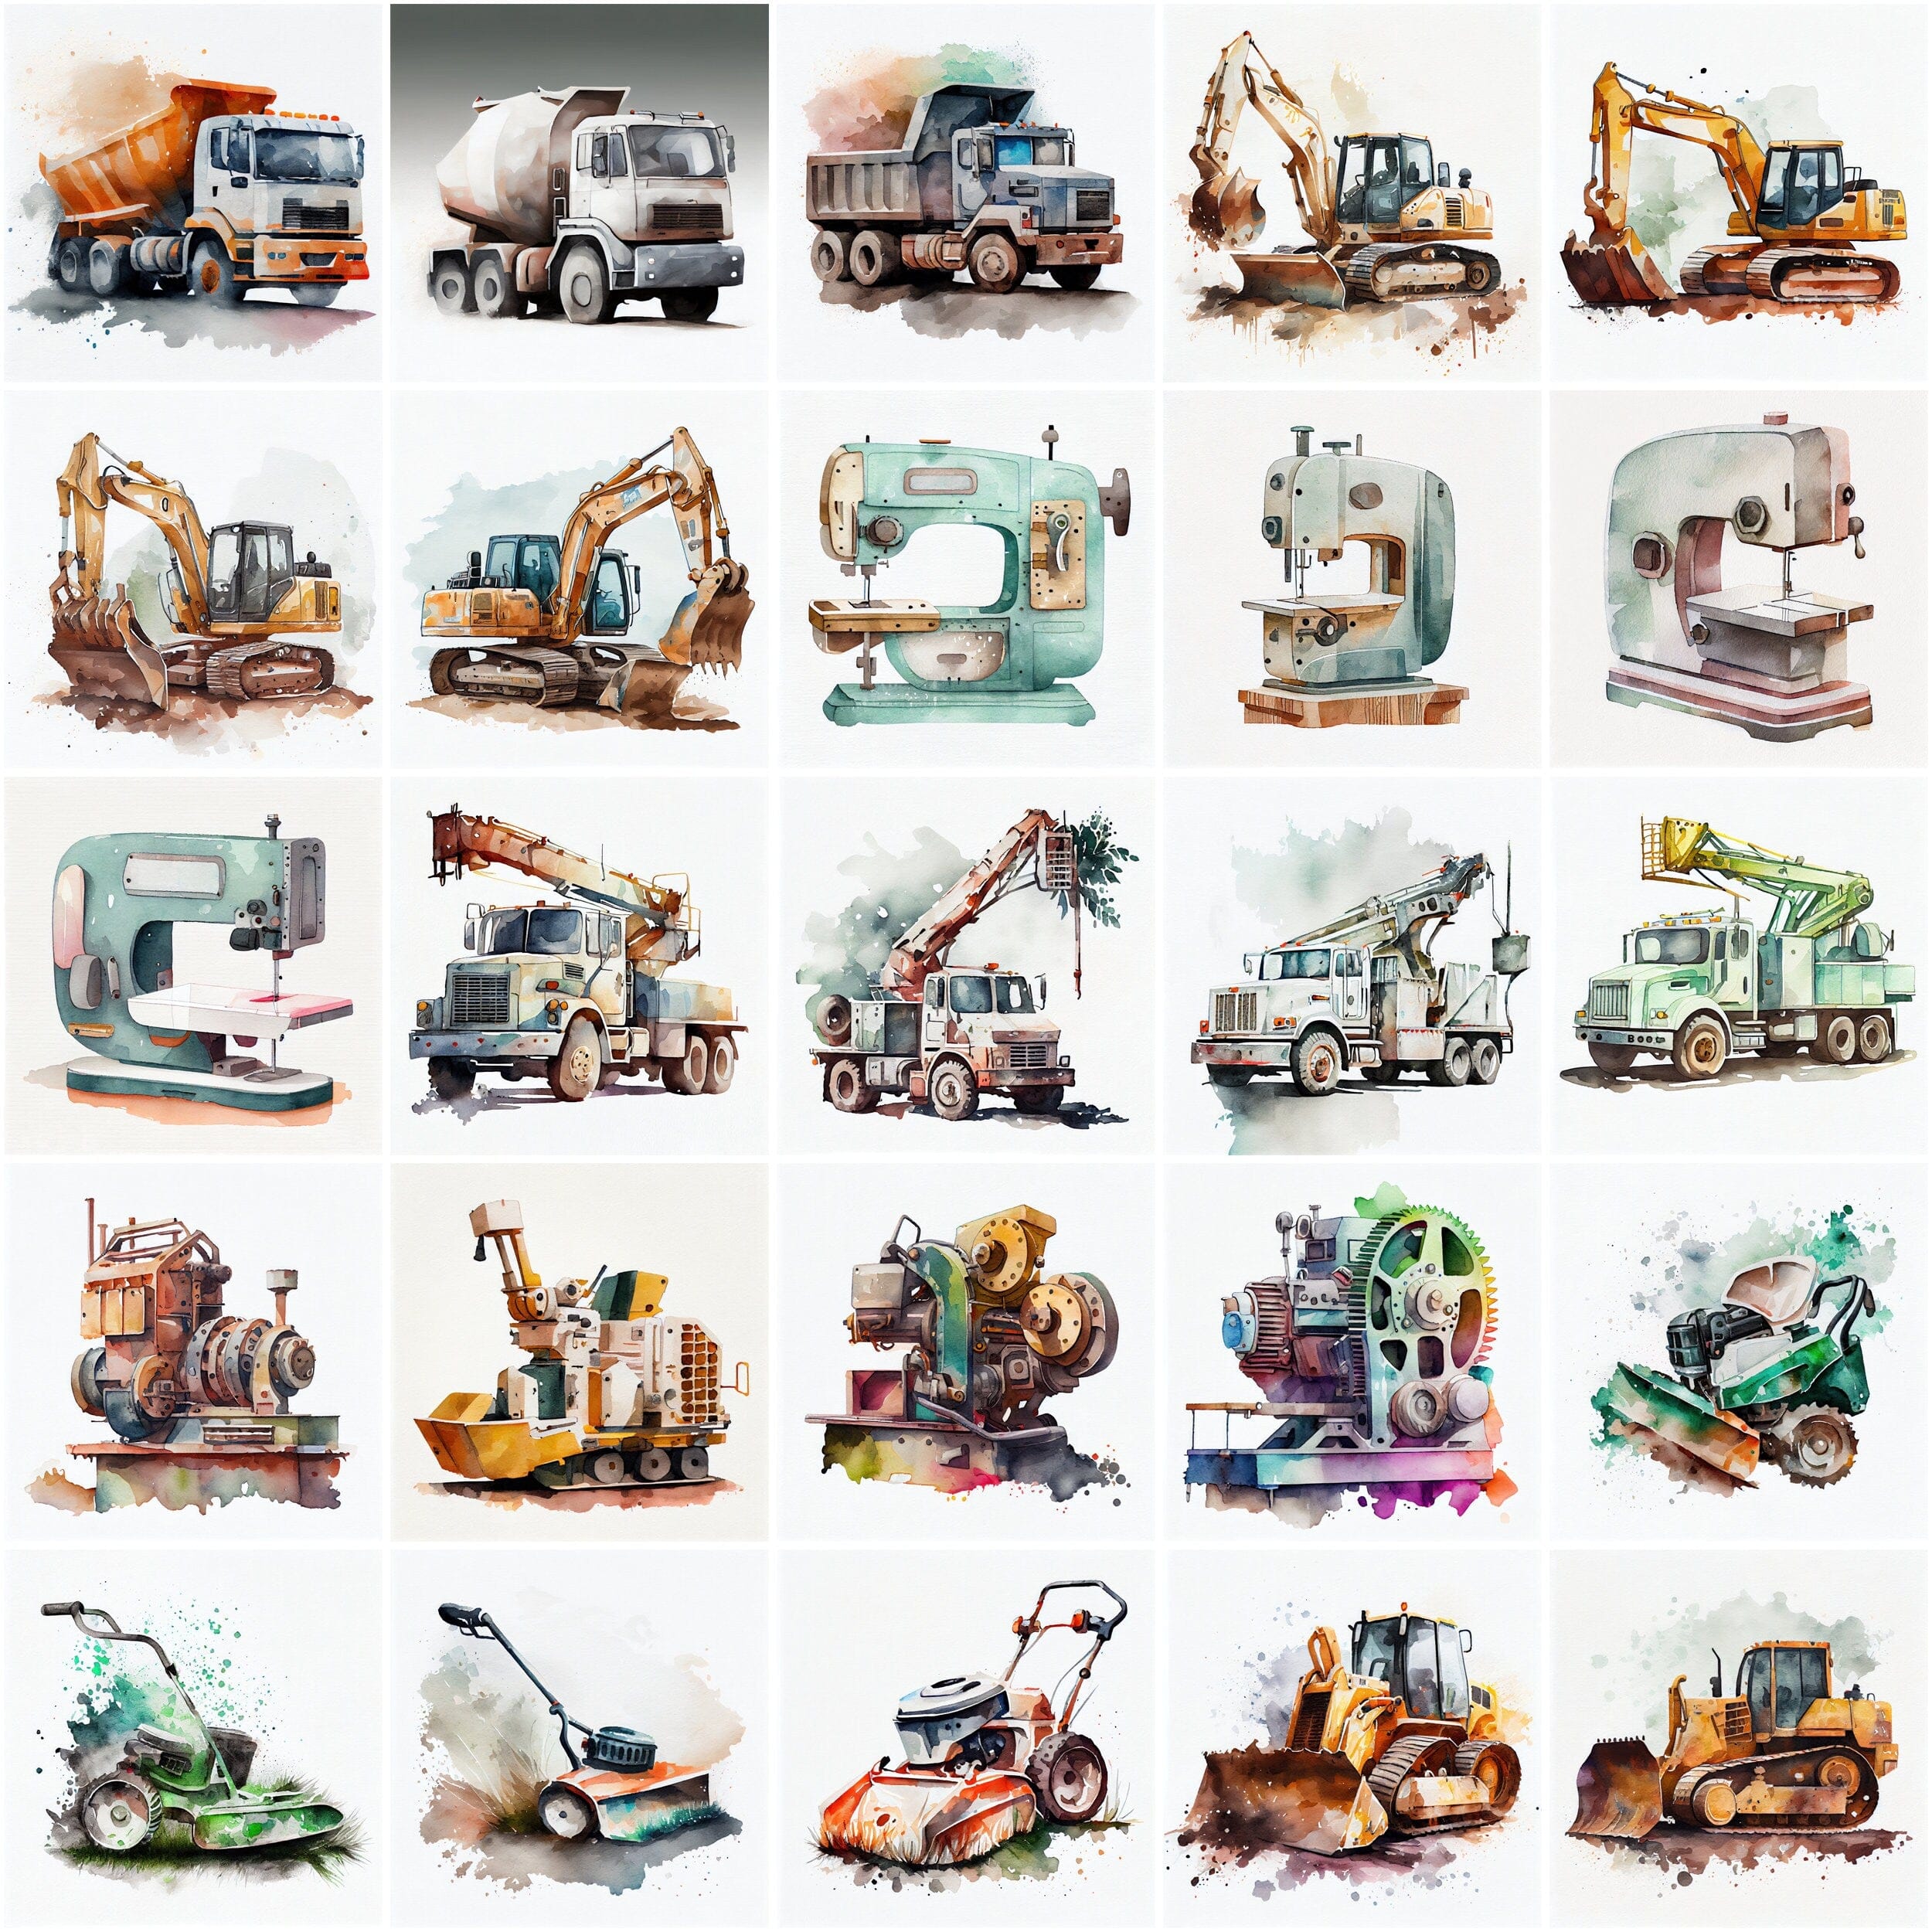 170 High-Quality Watercolor Images of Construction Tools, Equipment, and Materials for DIY Enthusiasts, and Construction Industry Experts Digital Download Sumobundle